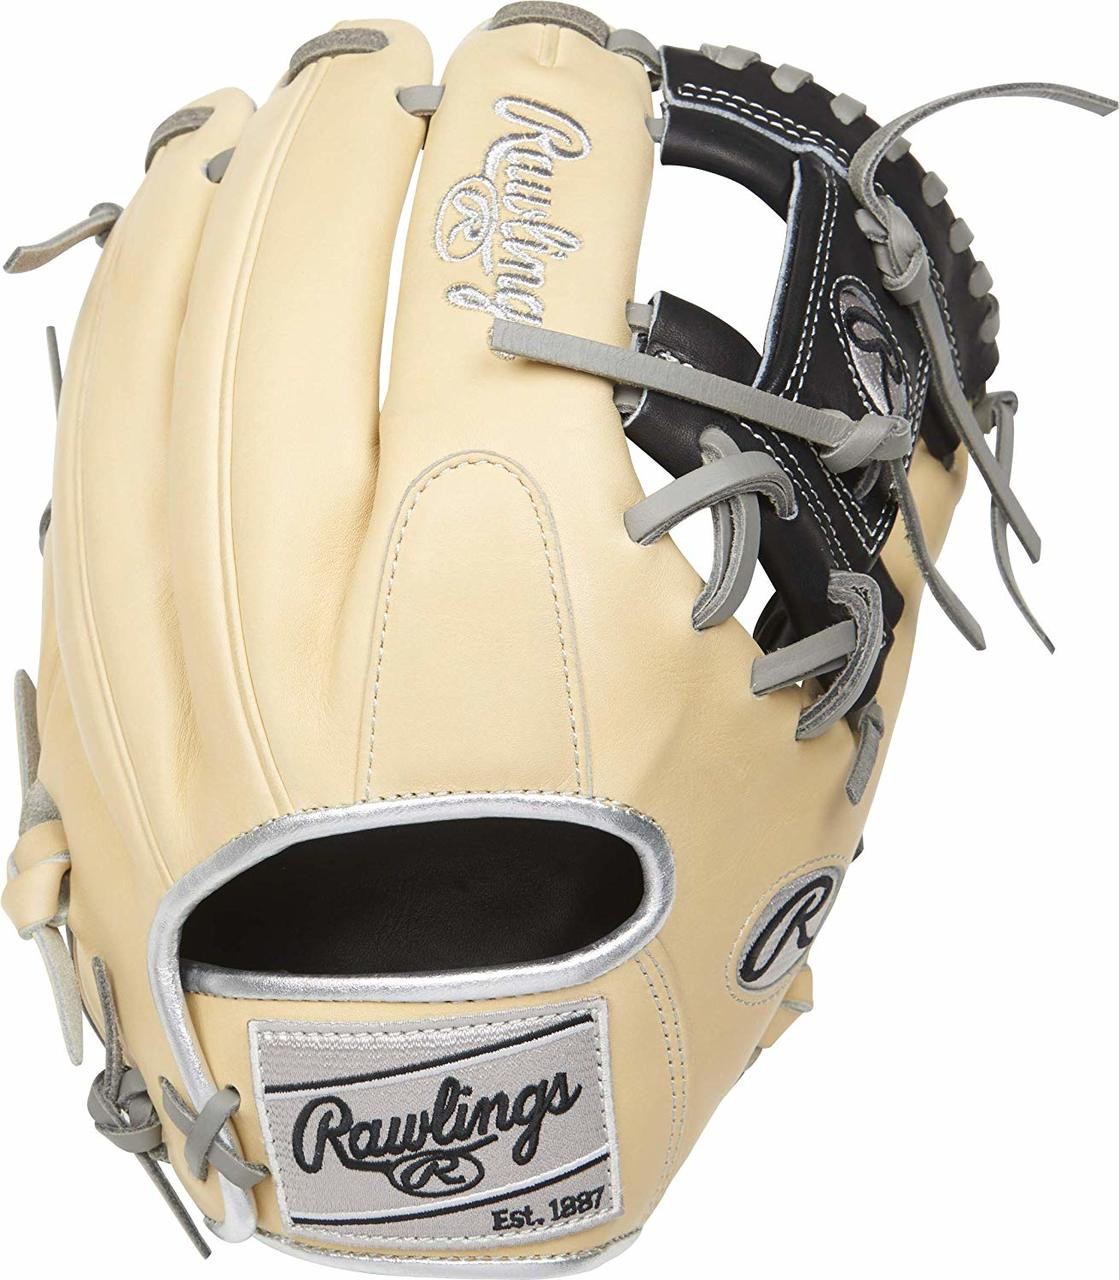 Rawlings has custom Gucci glove made for Francisco Lindor - On3